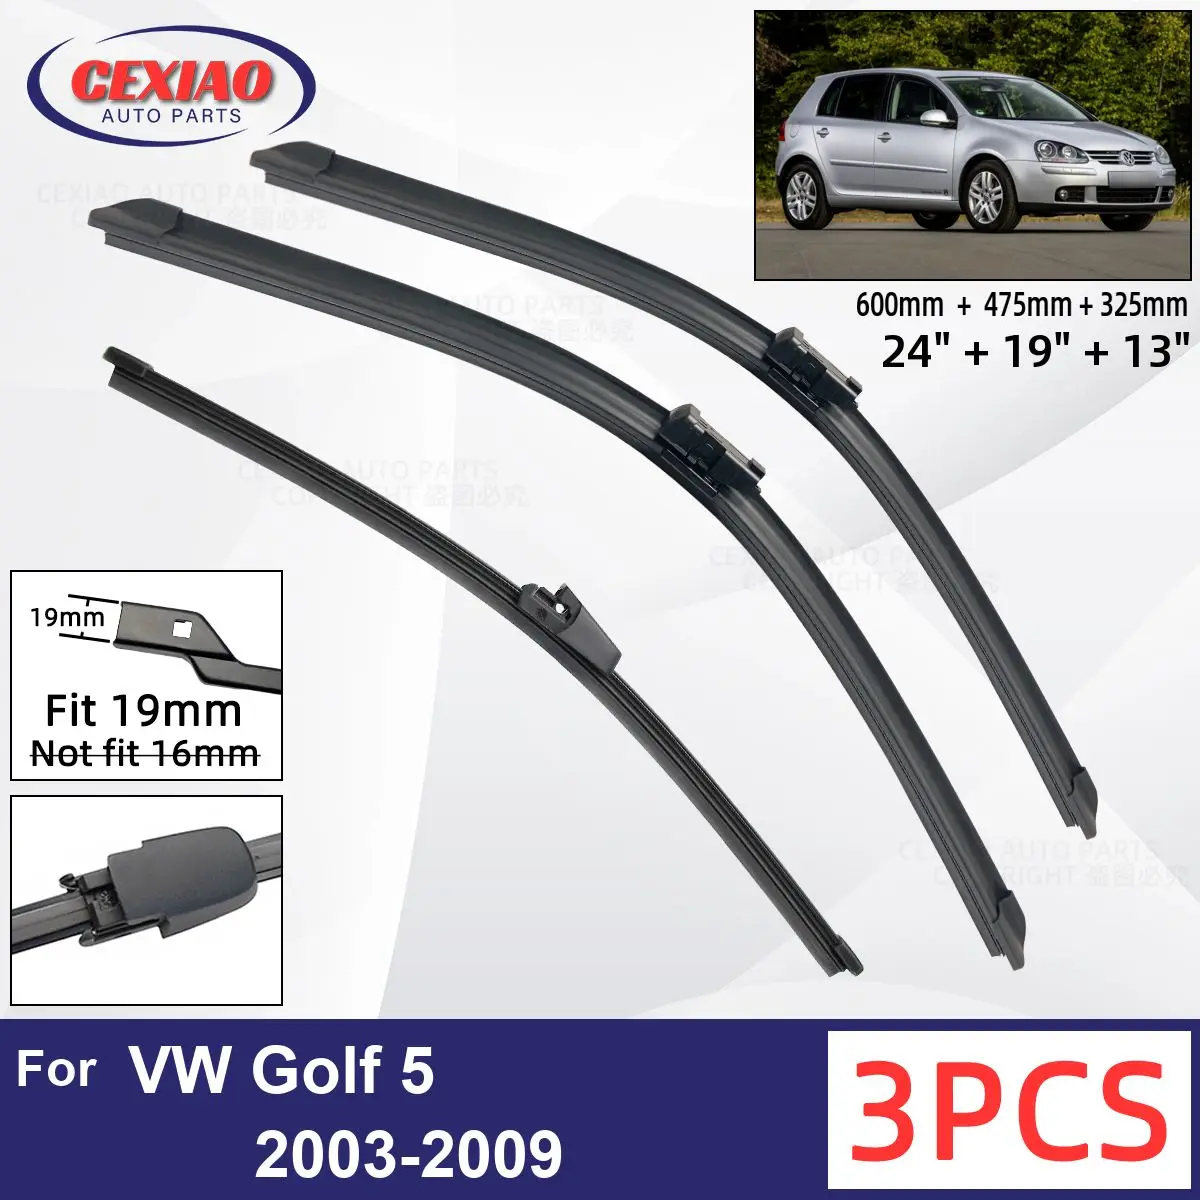 

For VW Golf 5 2003-2009 Car Front Rear Wiper Blades Soft Rubber Windscreen Wipers Auto Windshield 24"19"13" 2005 2006 2007 2008